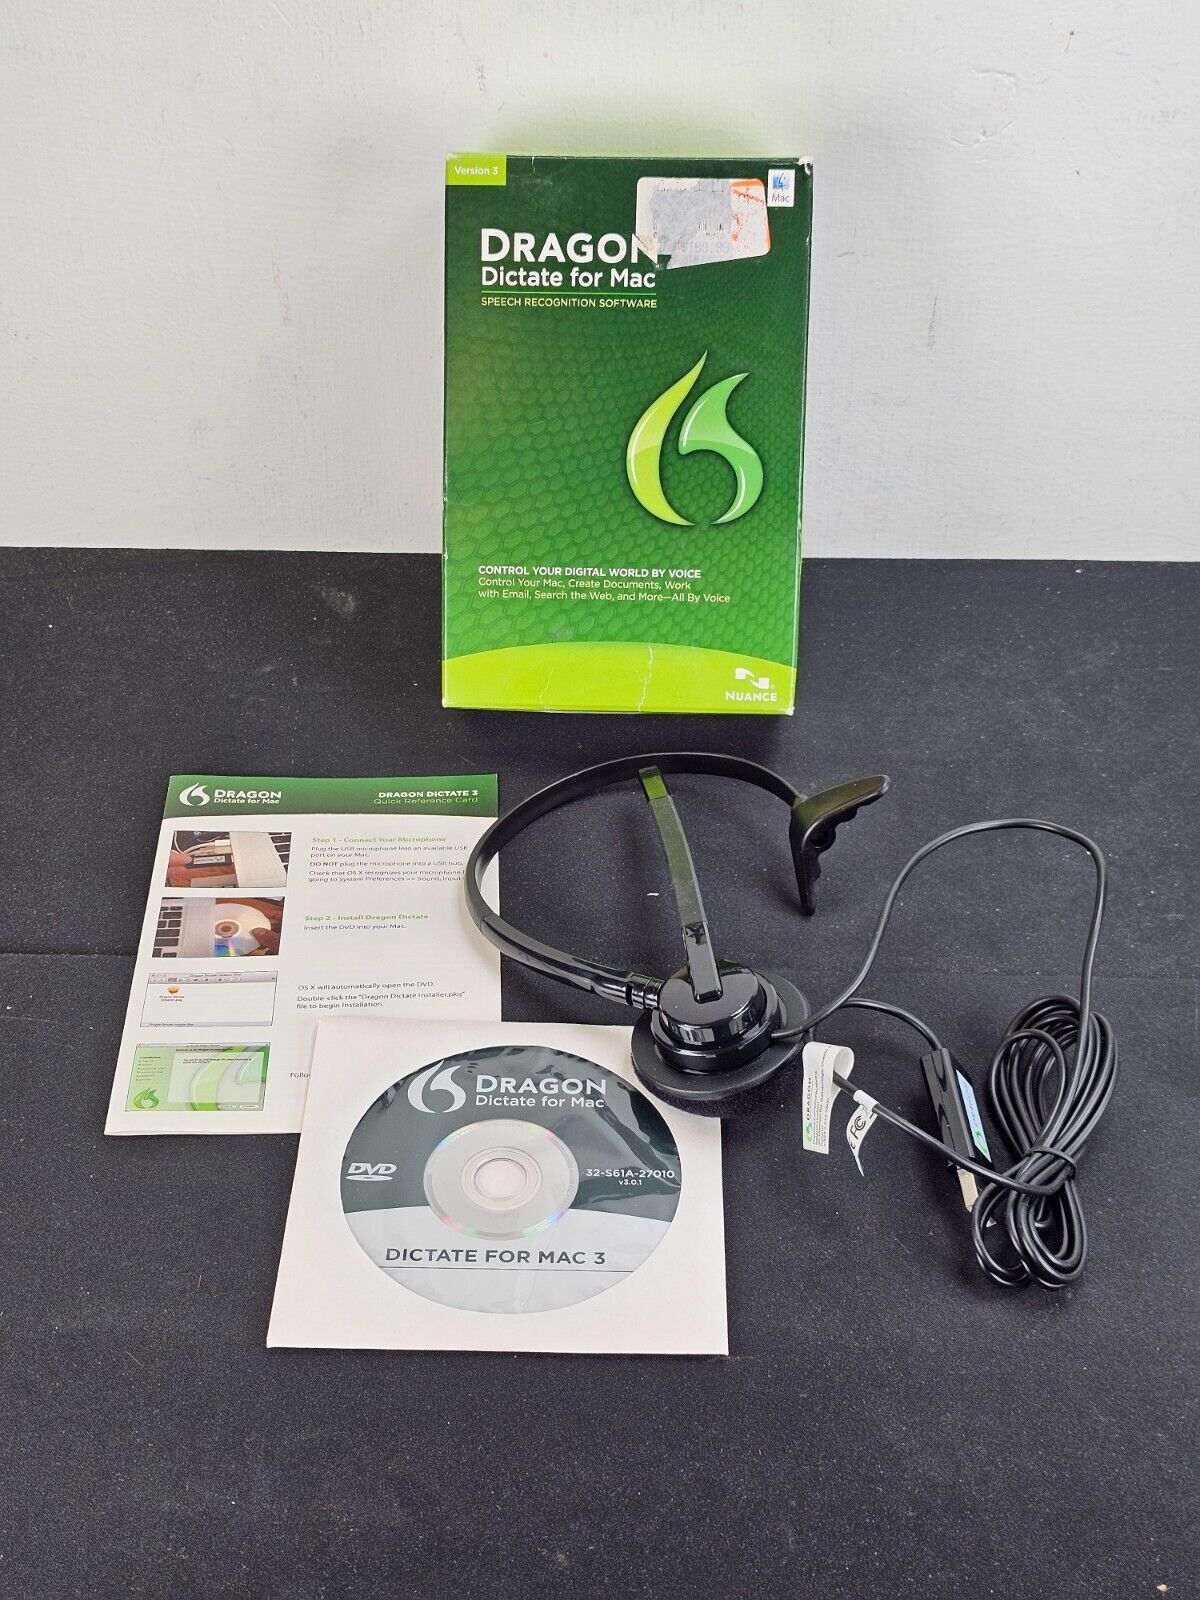 Dragon Dictate for Mac - Speech Recognition Software and Headset Version 3